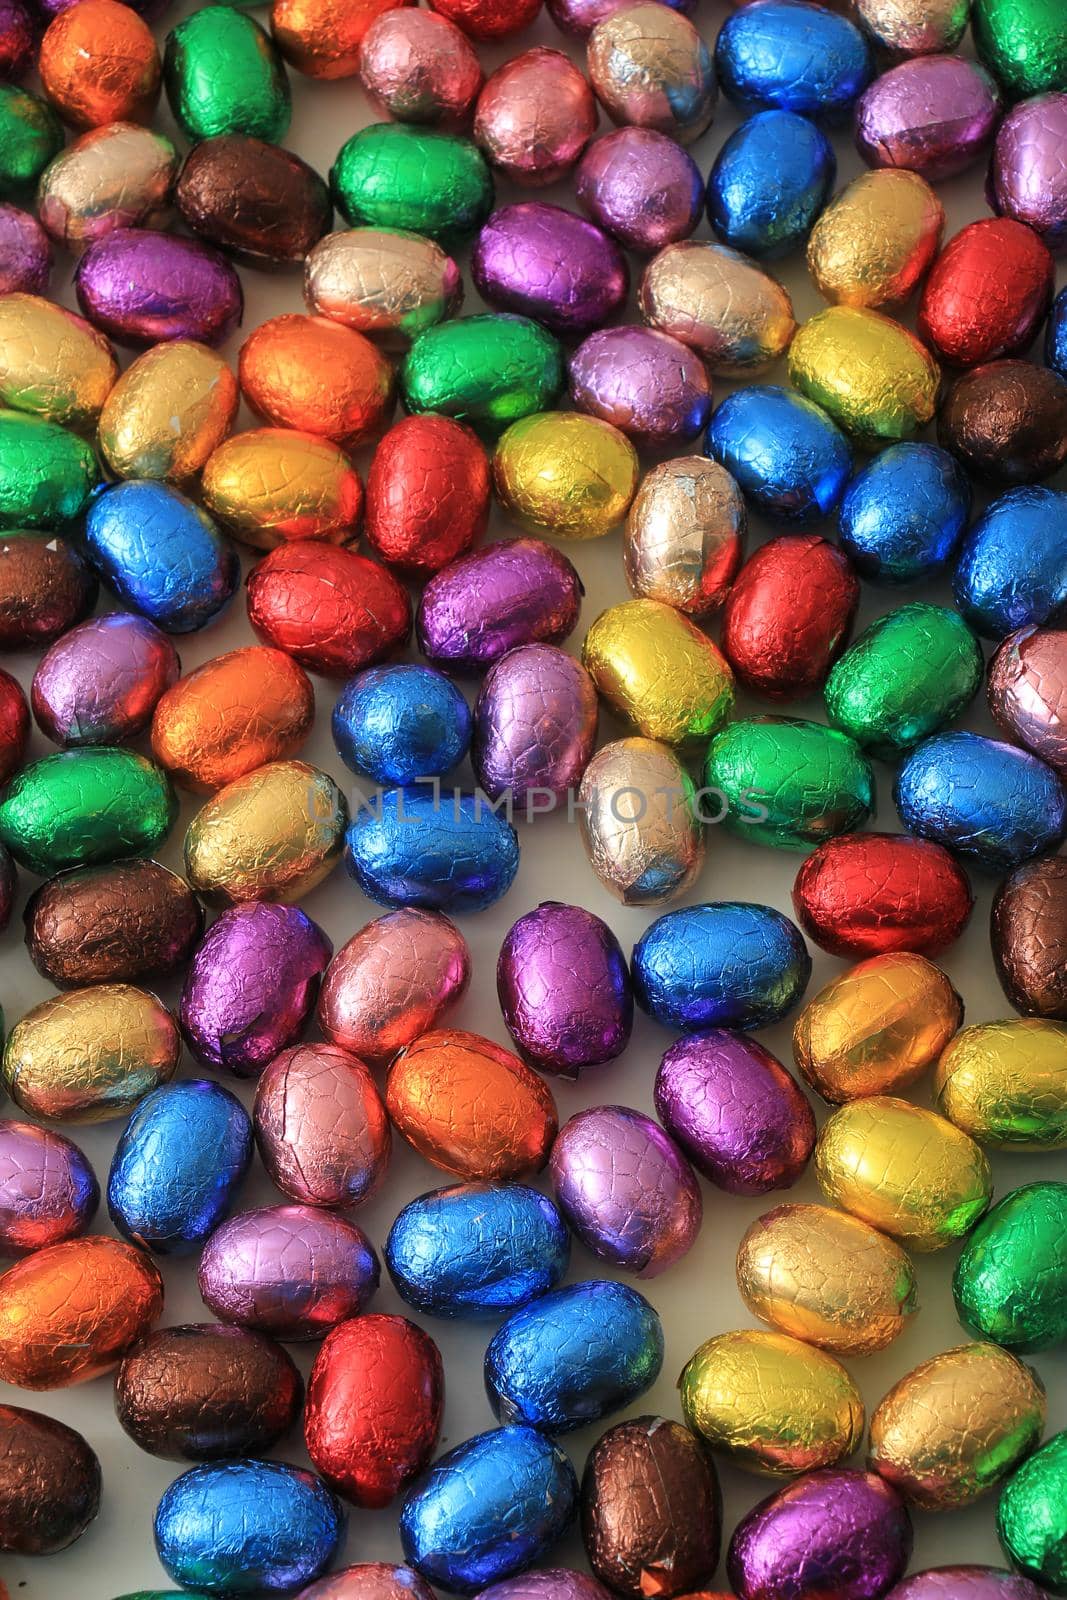 Big pile of colorful wrapped chocolate easter eggs